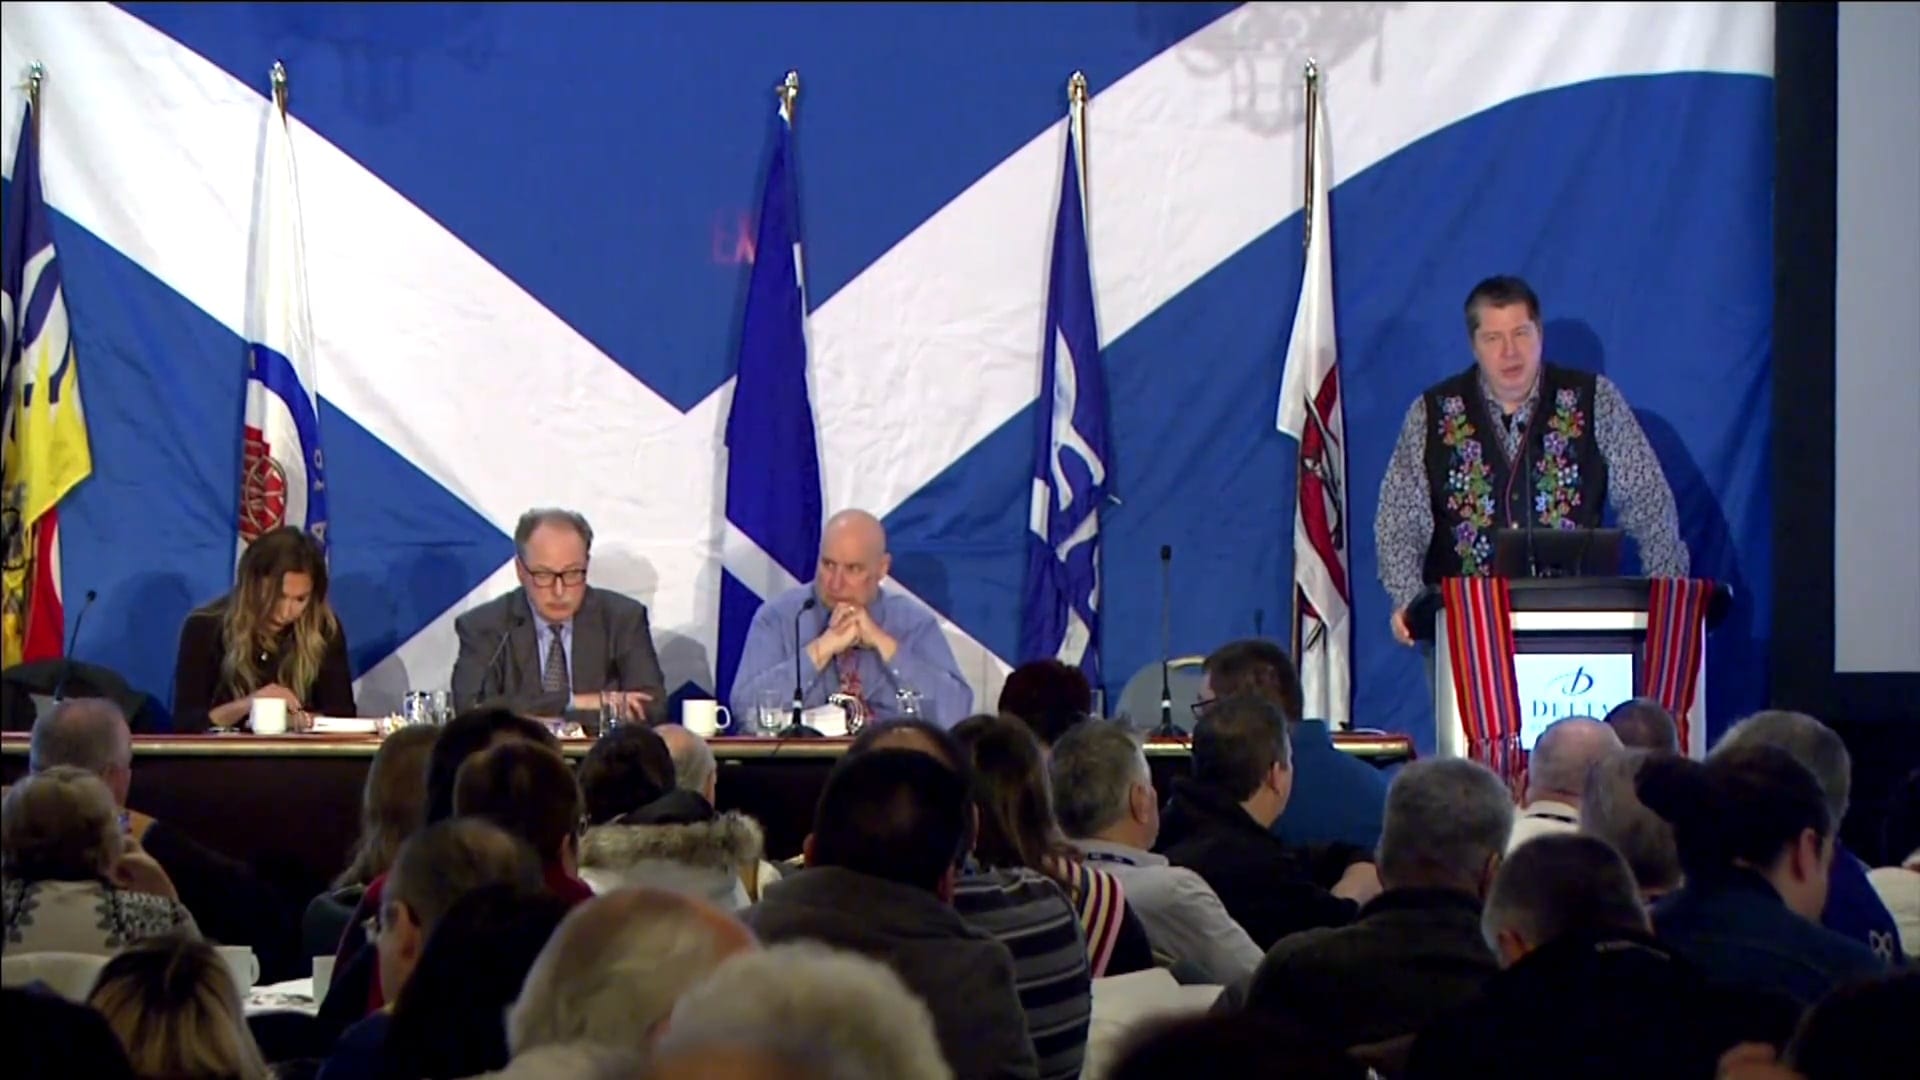 Metis National Council disagrees with motion to exonerate Louis Riel - APTN News